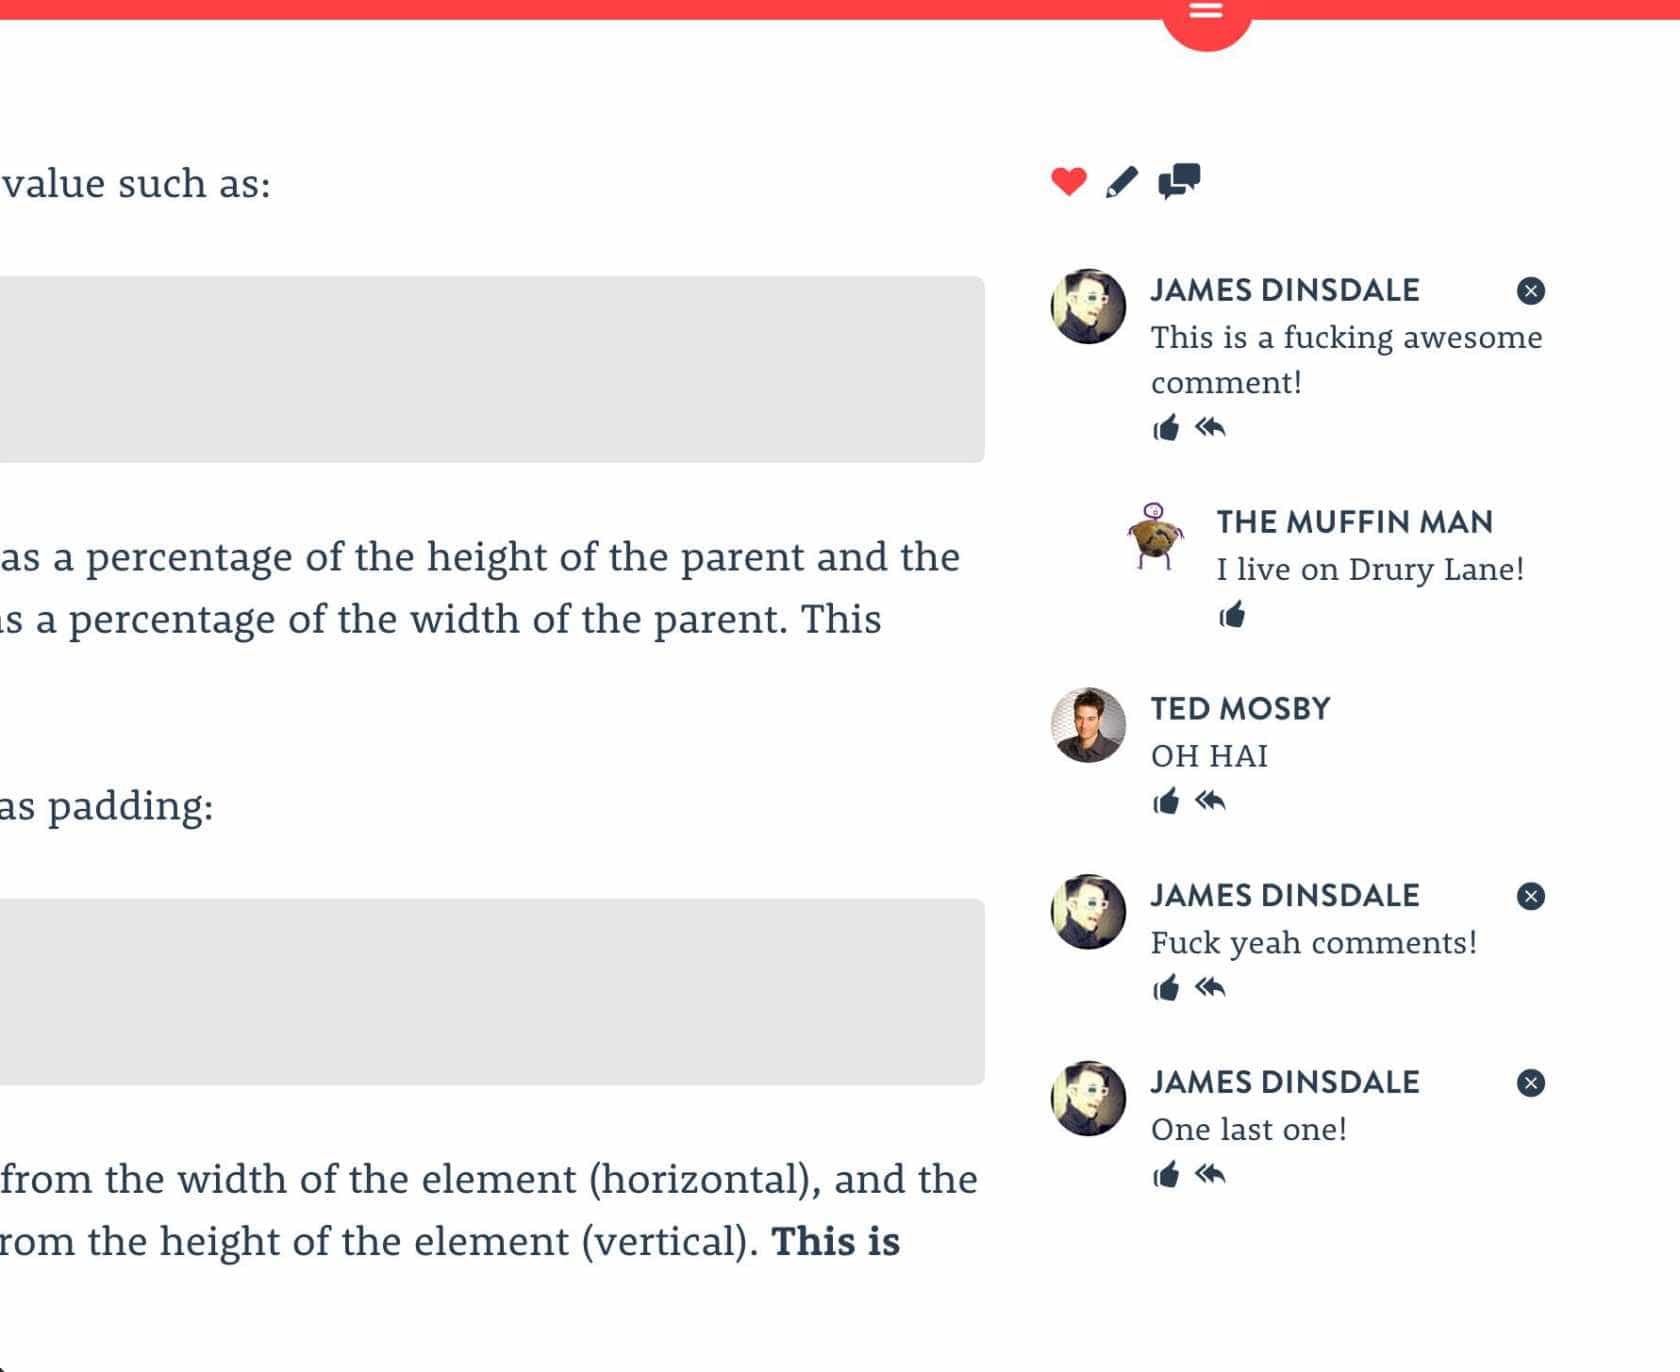 A screenshot of the commenting service Chatter, which I launched in 2013, appearing on an older version of this blog.